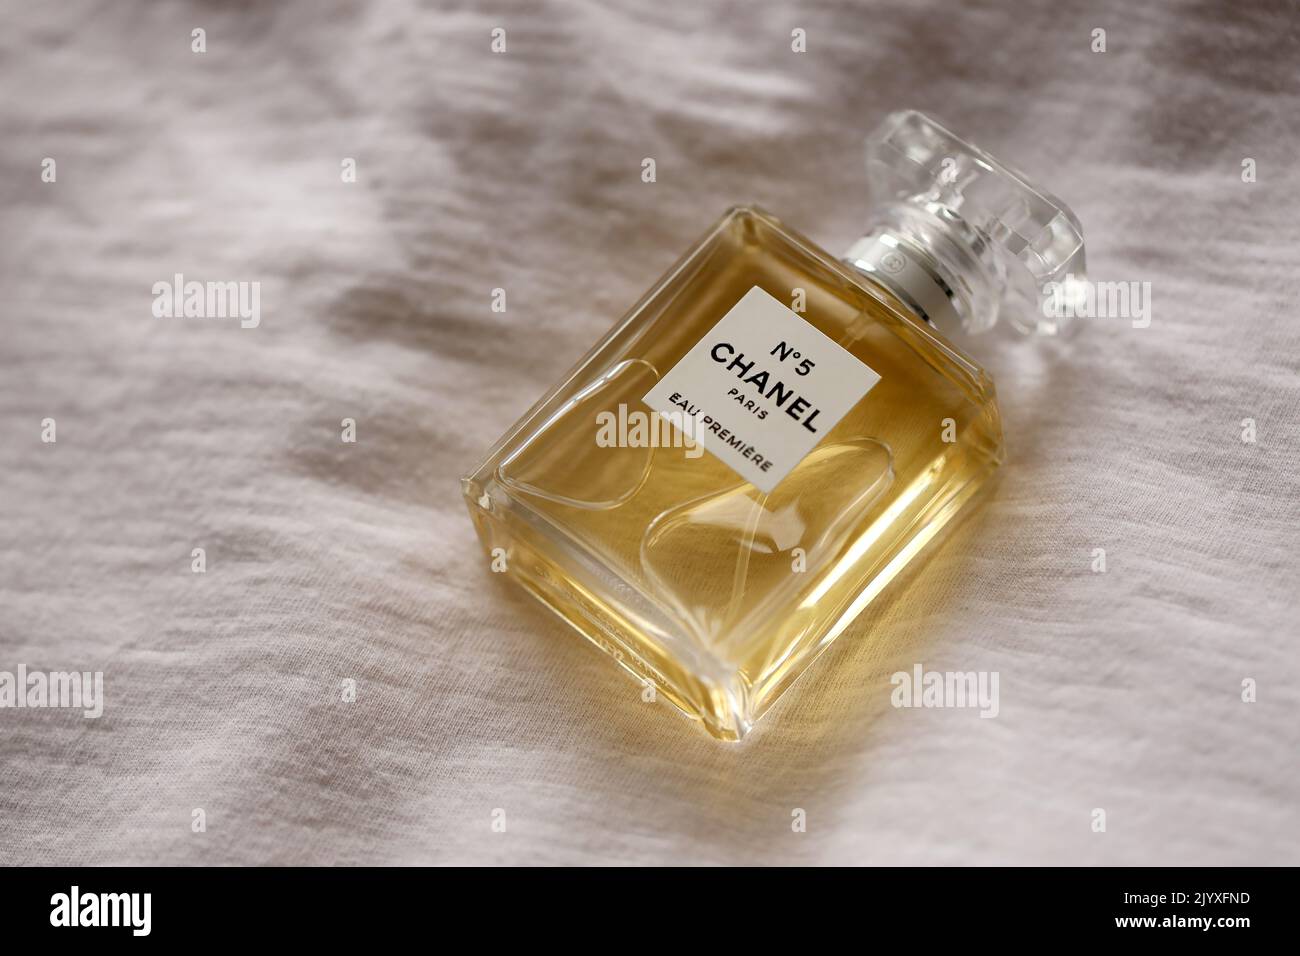 TERNOPIL, UKRAINE - SEPTEMBER 2, 2022 Chanel Number 5 Eau Premiere worldwide famous french perfume bottle on old white drapery close up Stock Photo